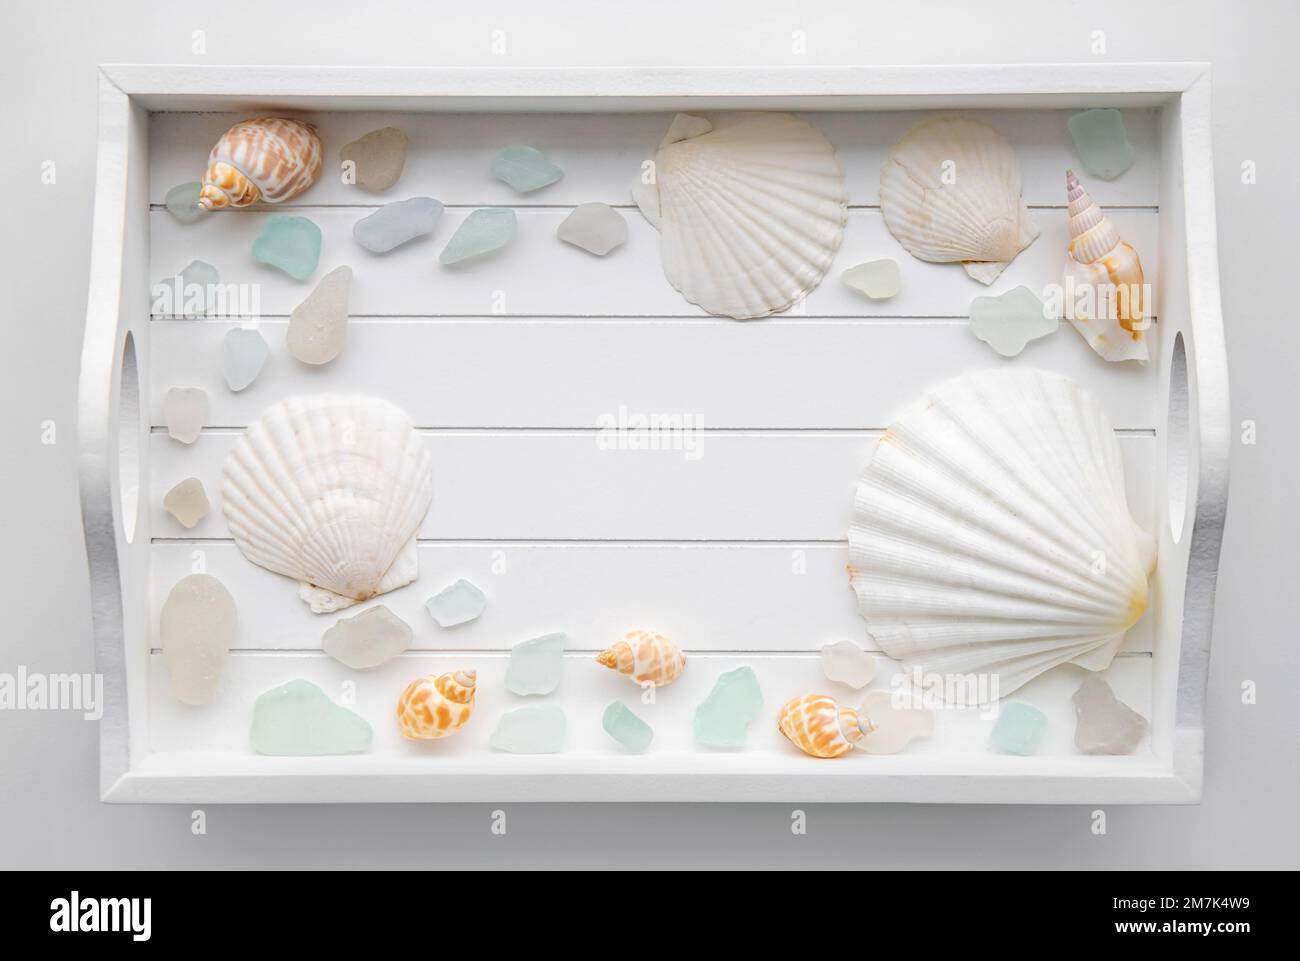 Flat lay view of white wood tray with seashells and sea glass, copy space in the center. Travel destination or beauty products background. Stock Photo